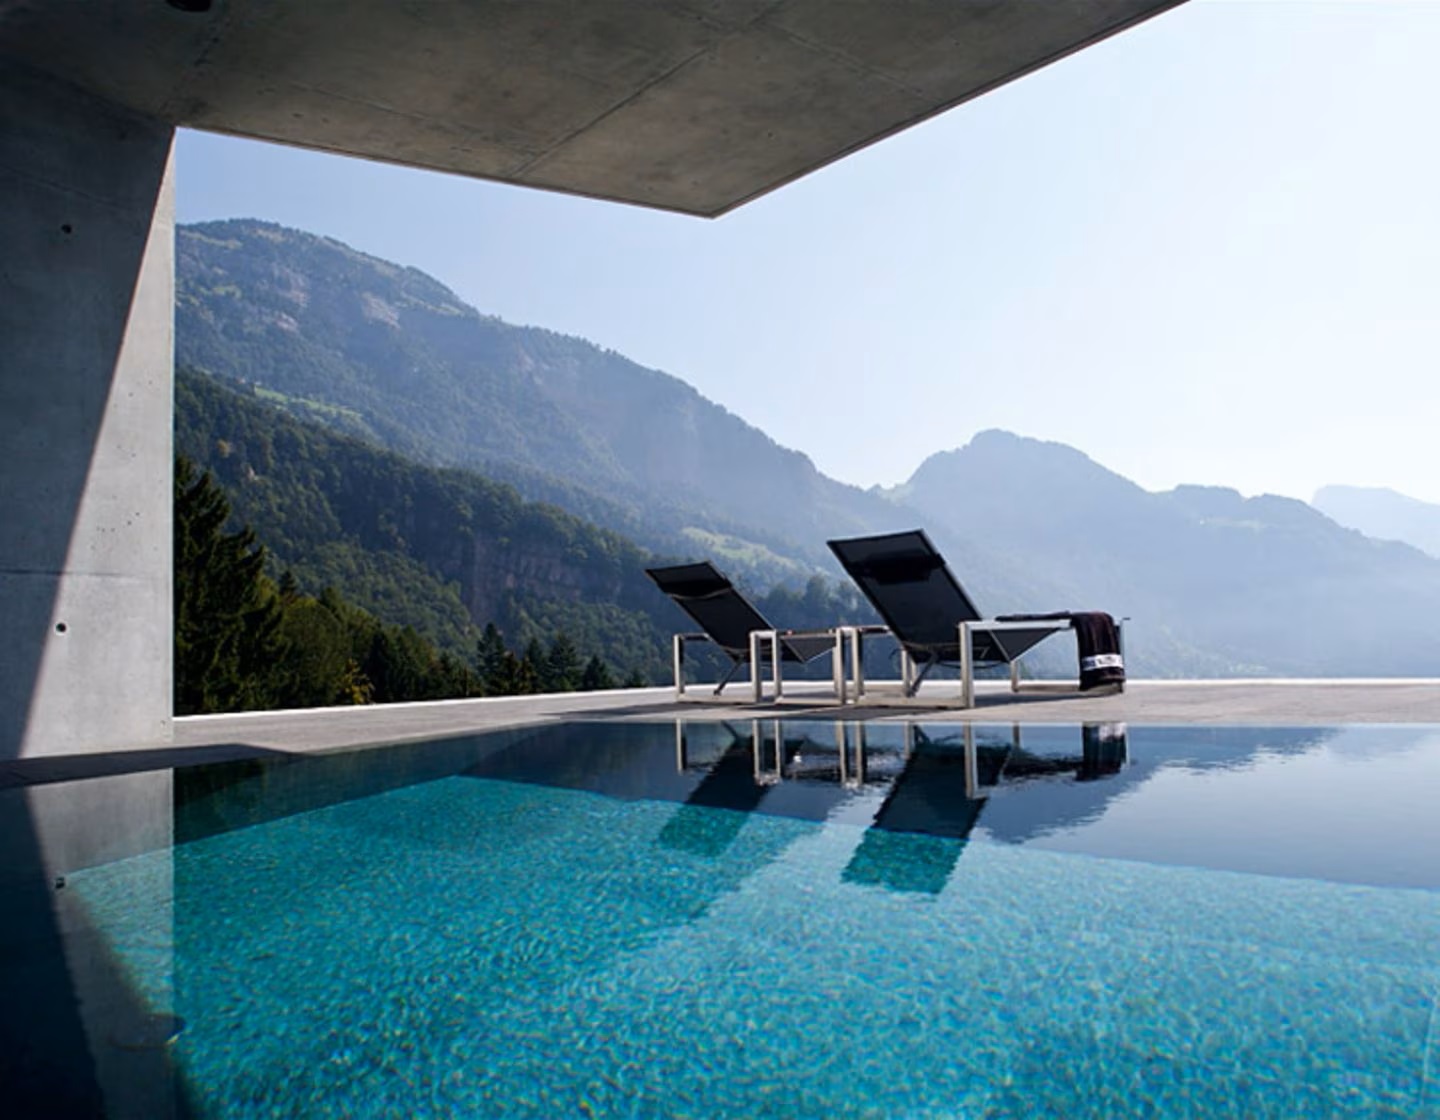 Villa Am See In The Swiss Alps By Unger & Treina AG